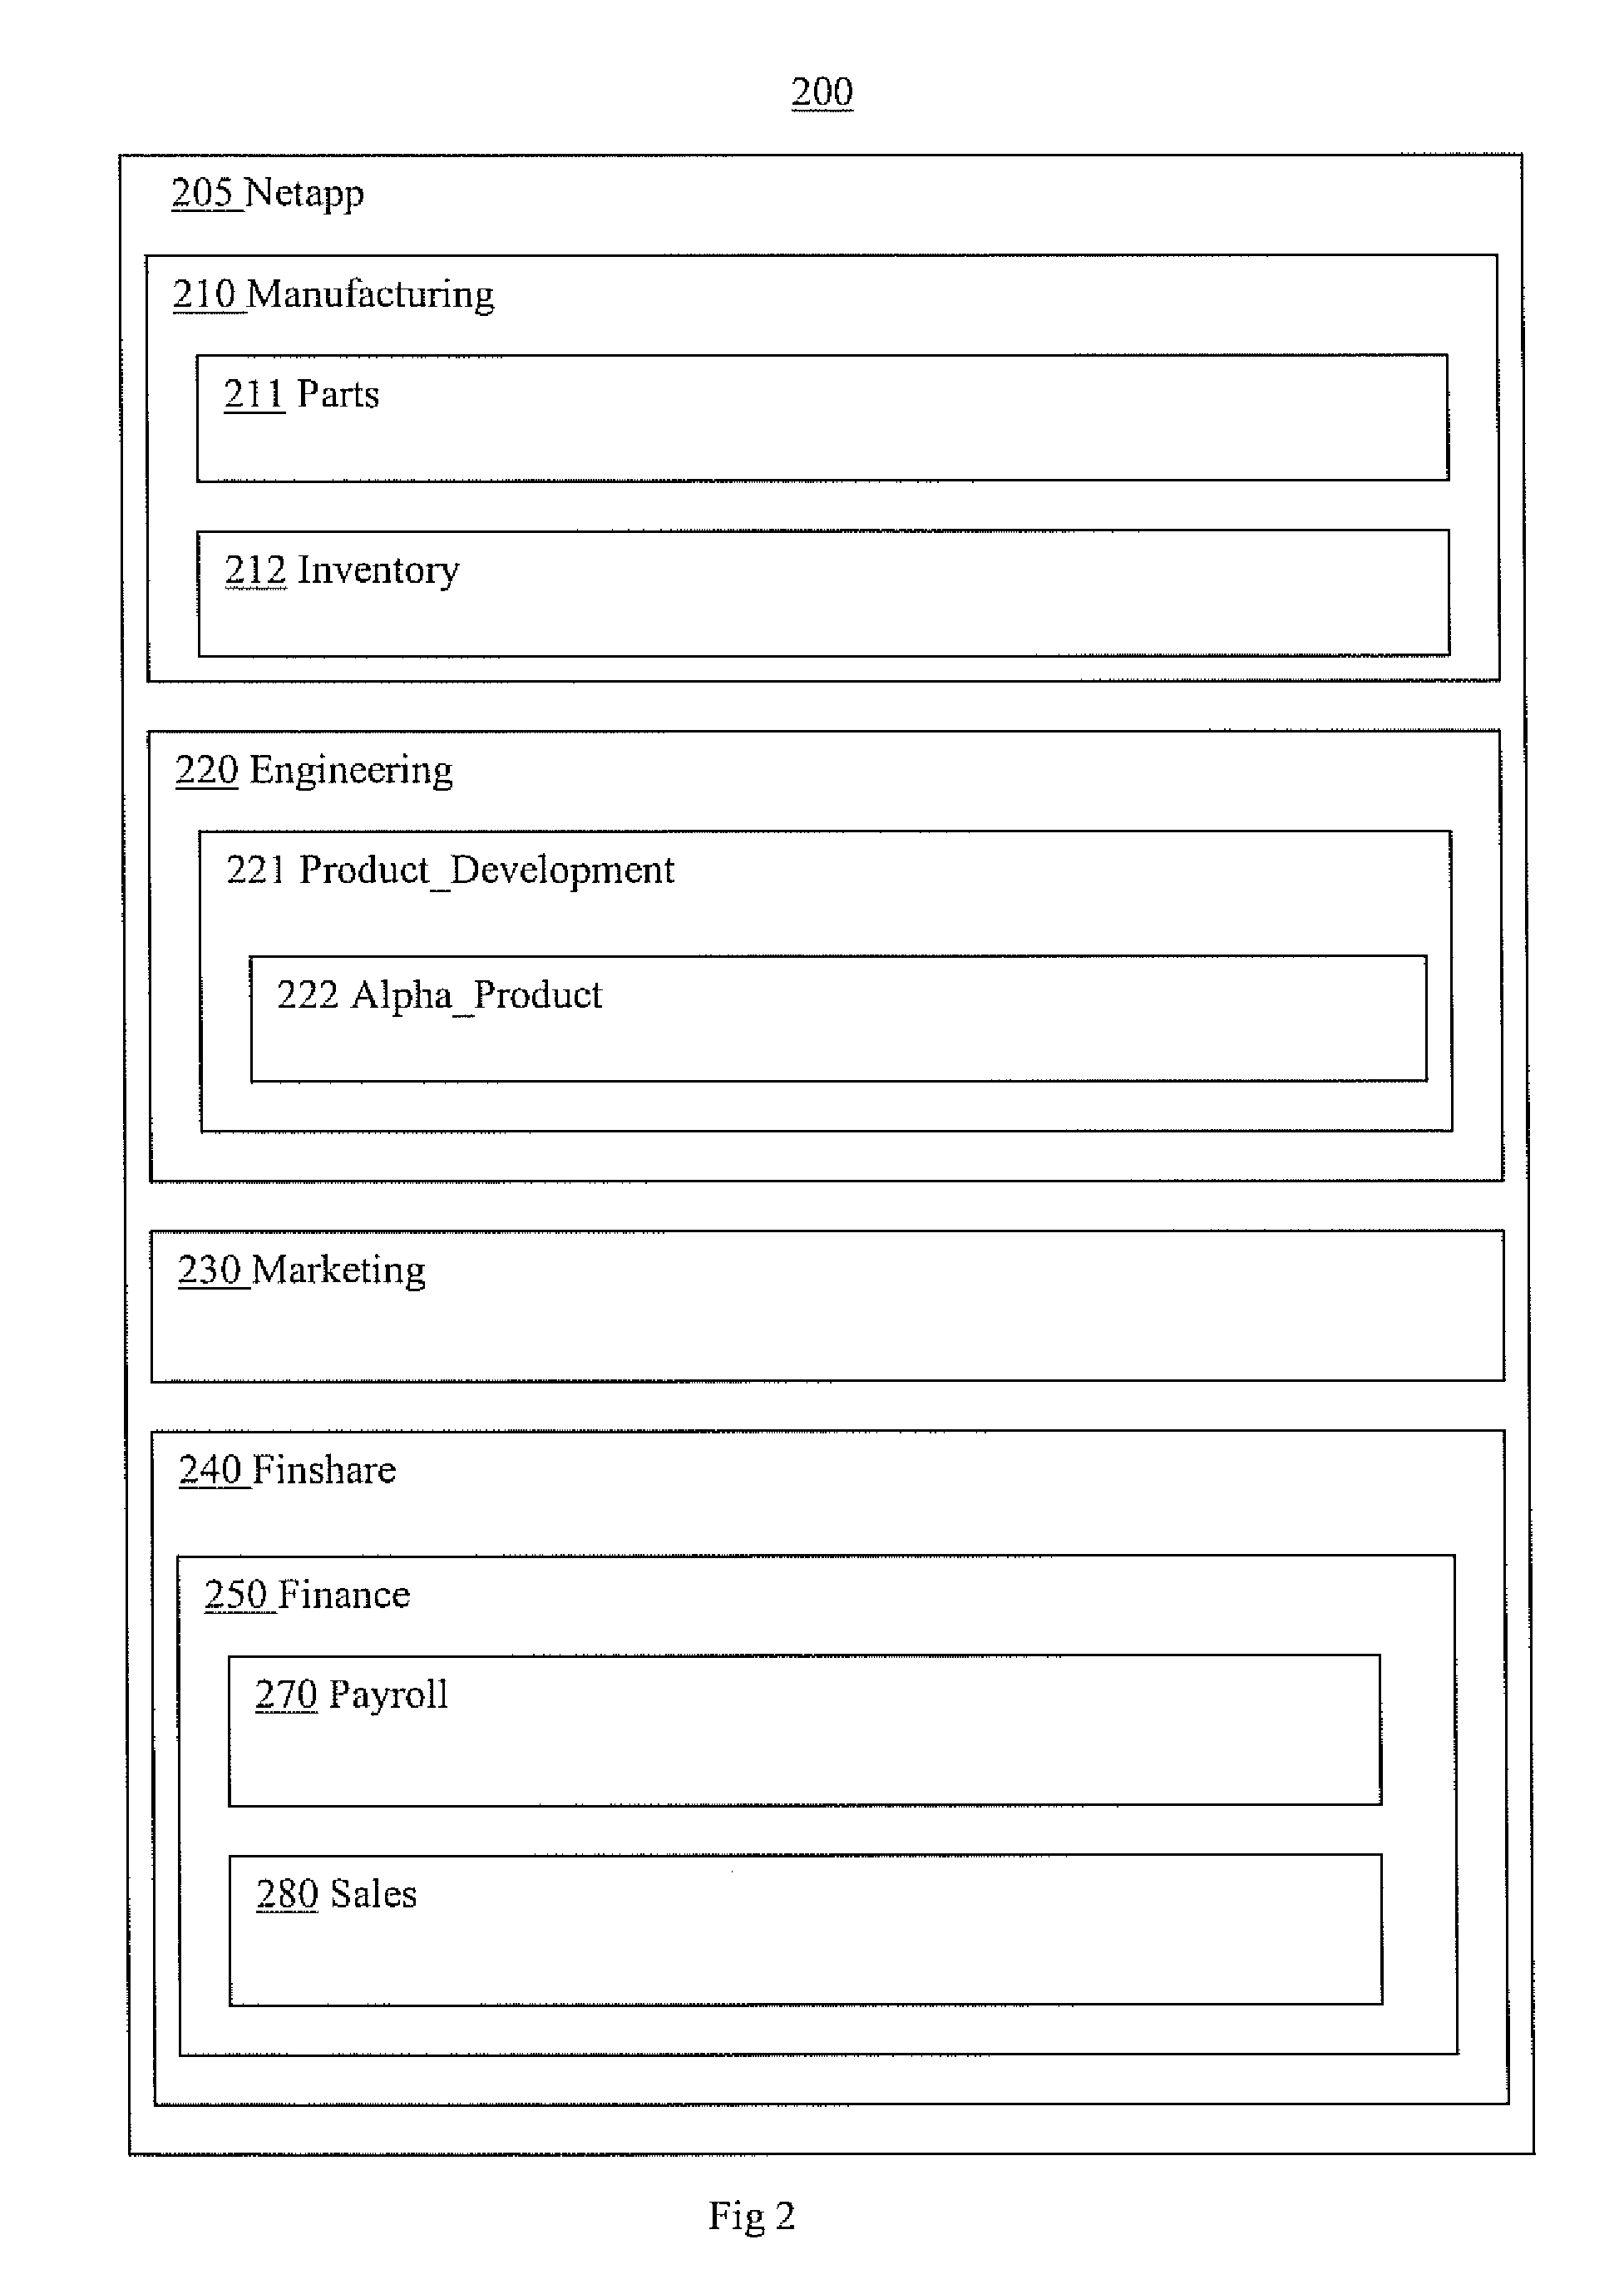 Permission tracking systems and methods